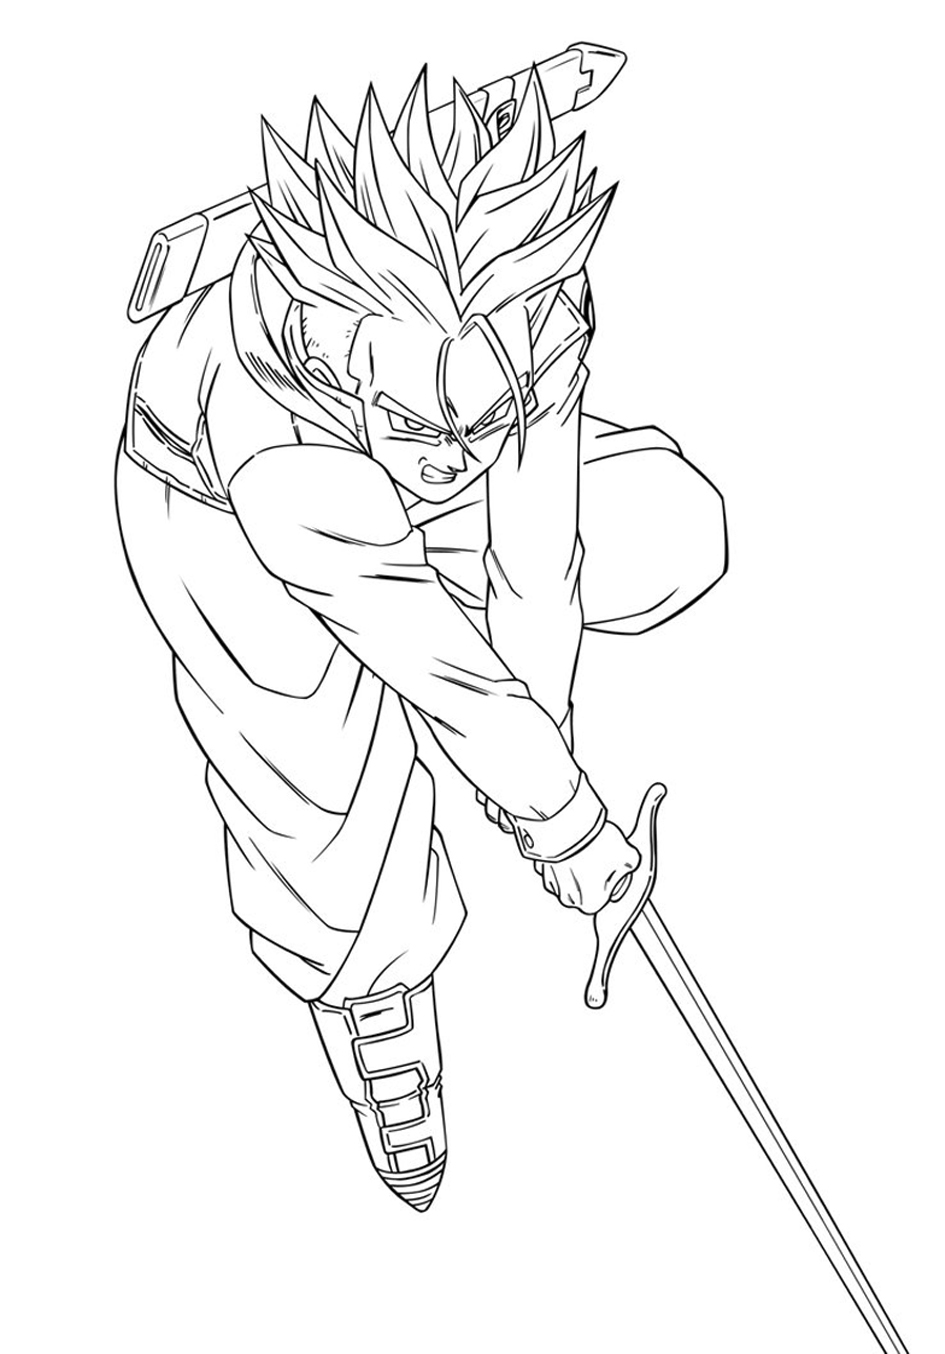 Easy free Dragon Ball Z coloring page to download : Trunks